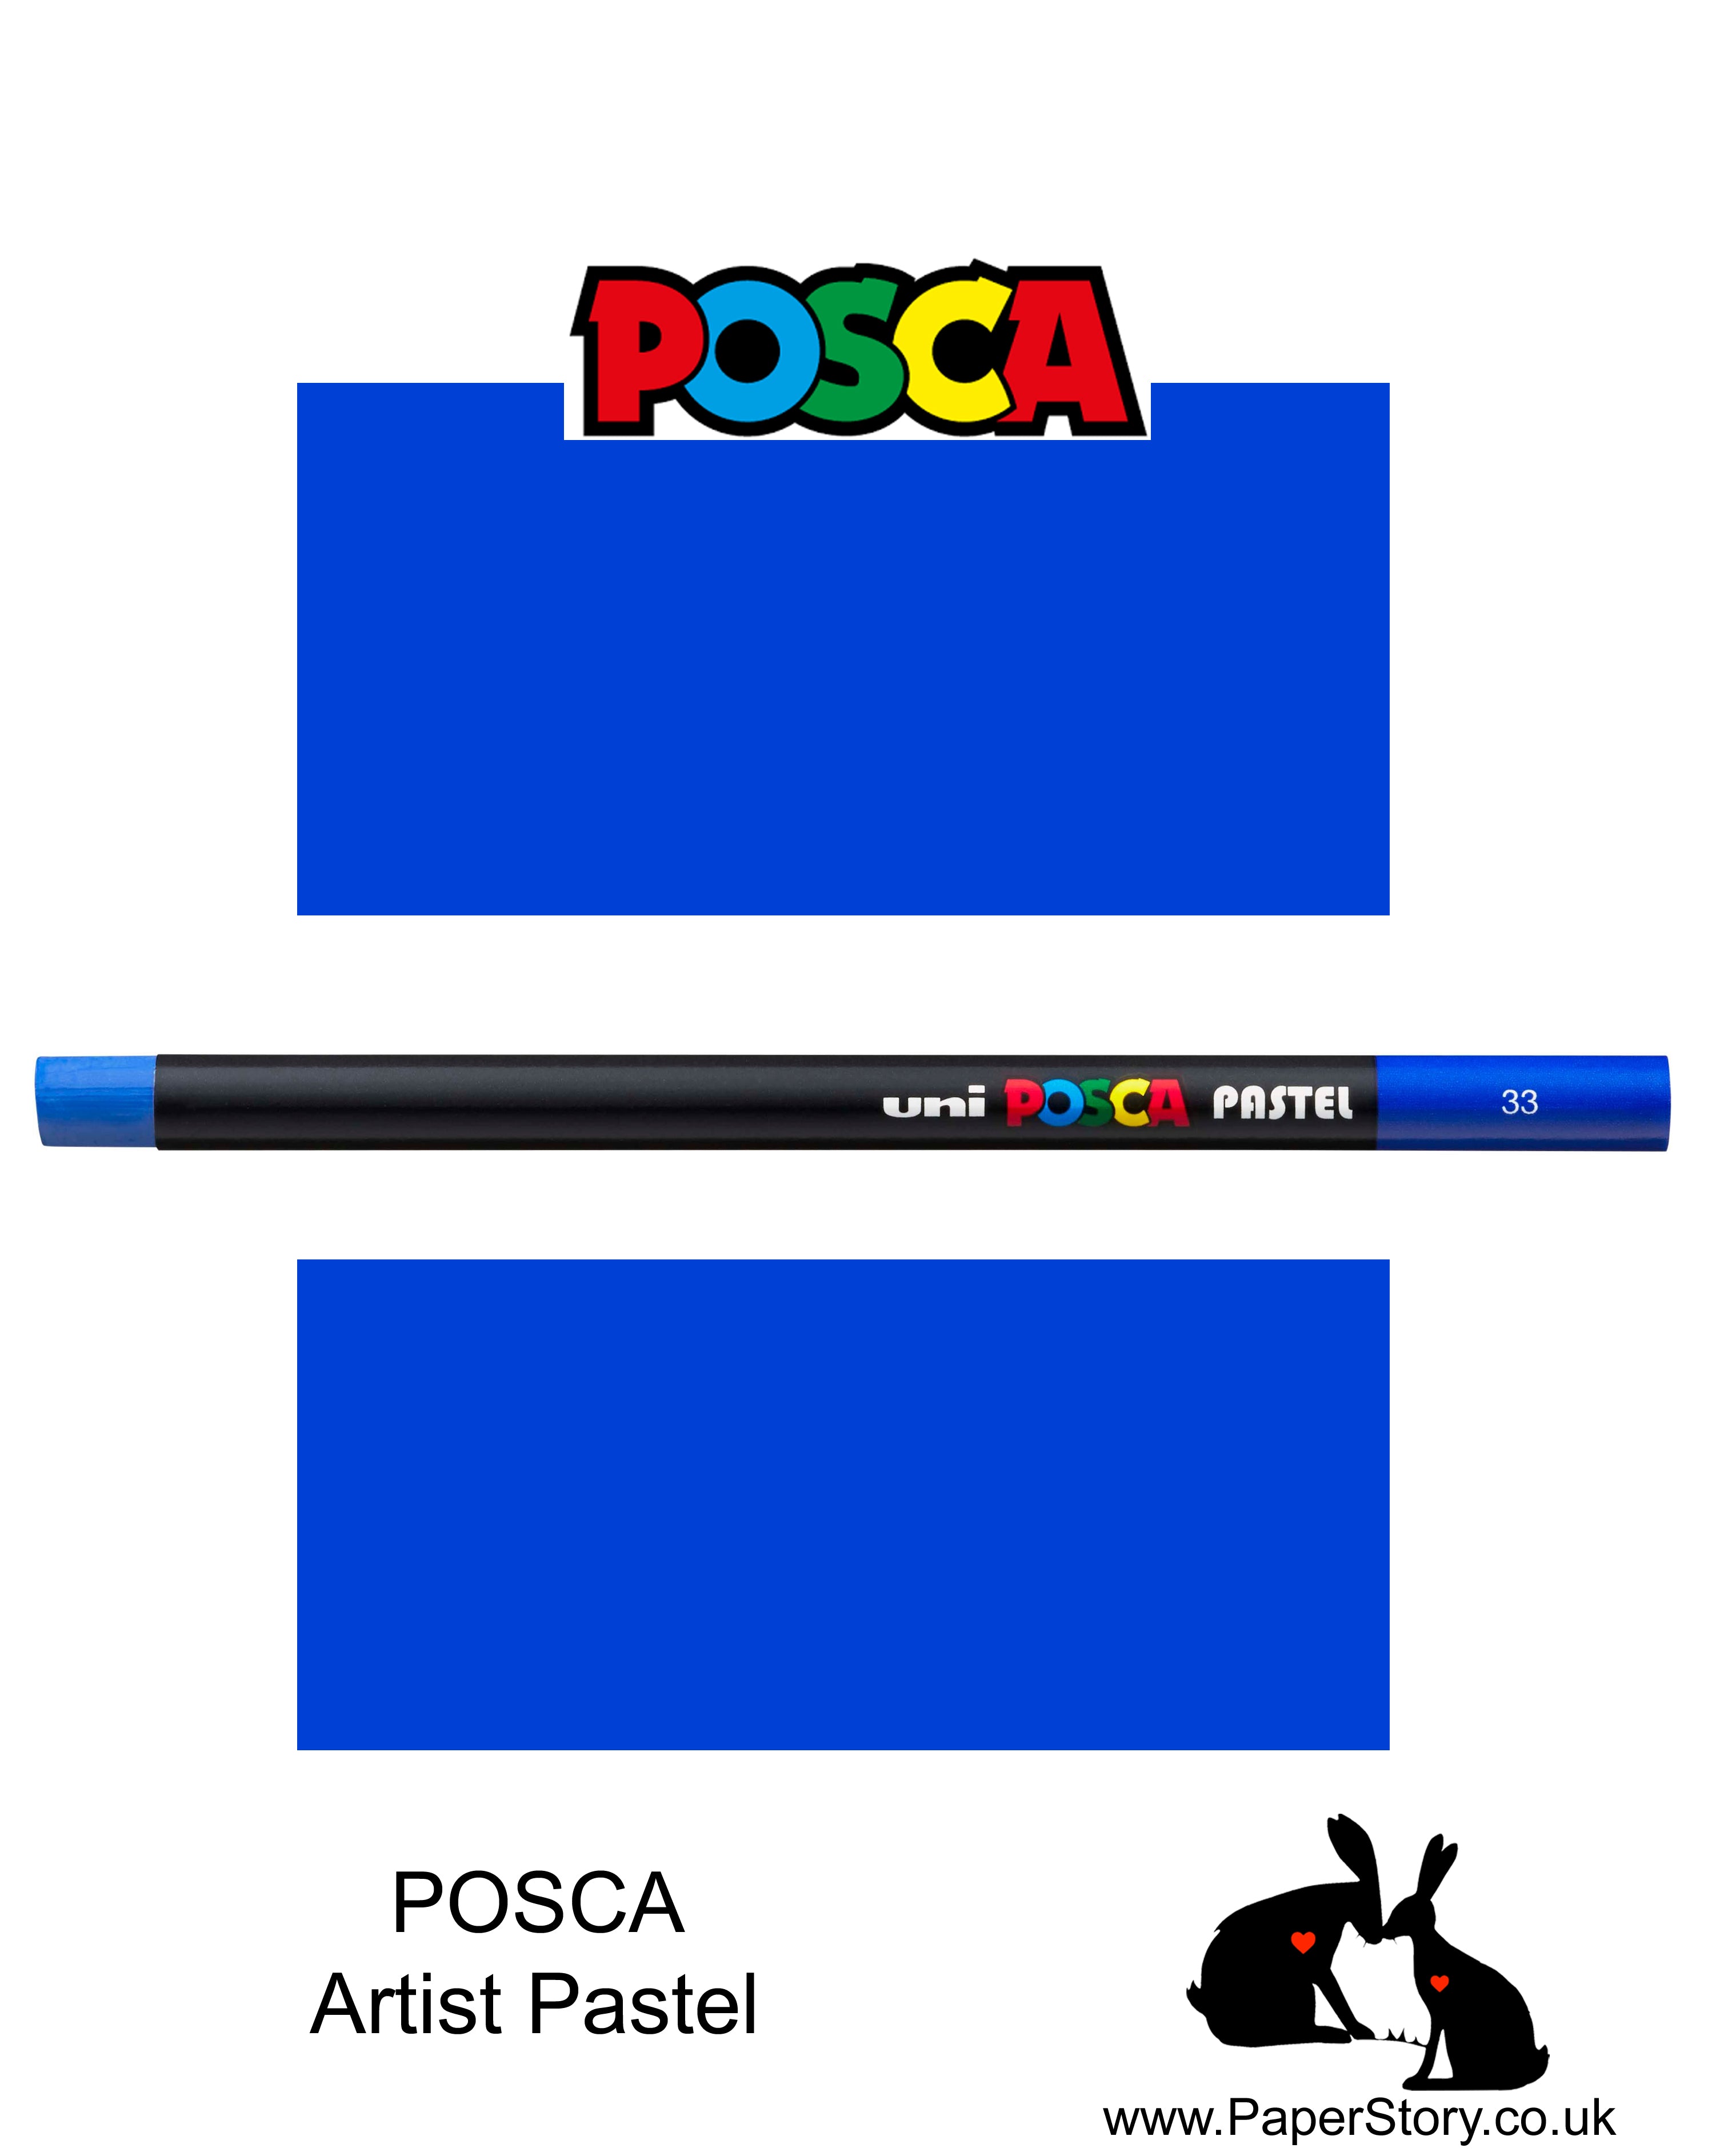 new POSCA Pastels Blue colour, can be blended and overlaid, you can stipple, colour block, cross-hatch, scratch and outline. You can heat the sticks to create textured effects. Full colour range here